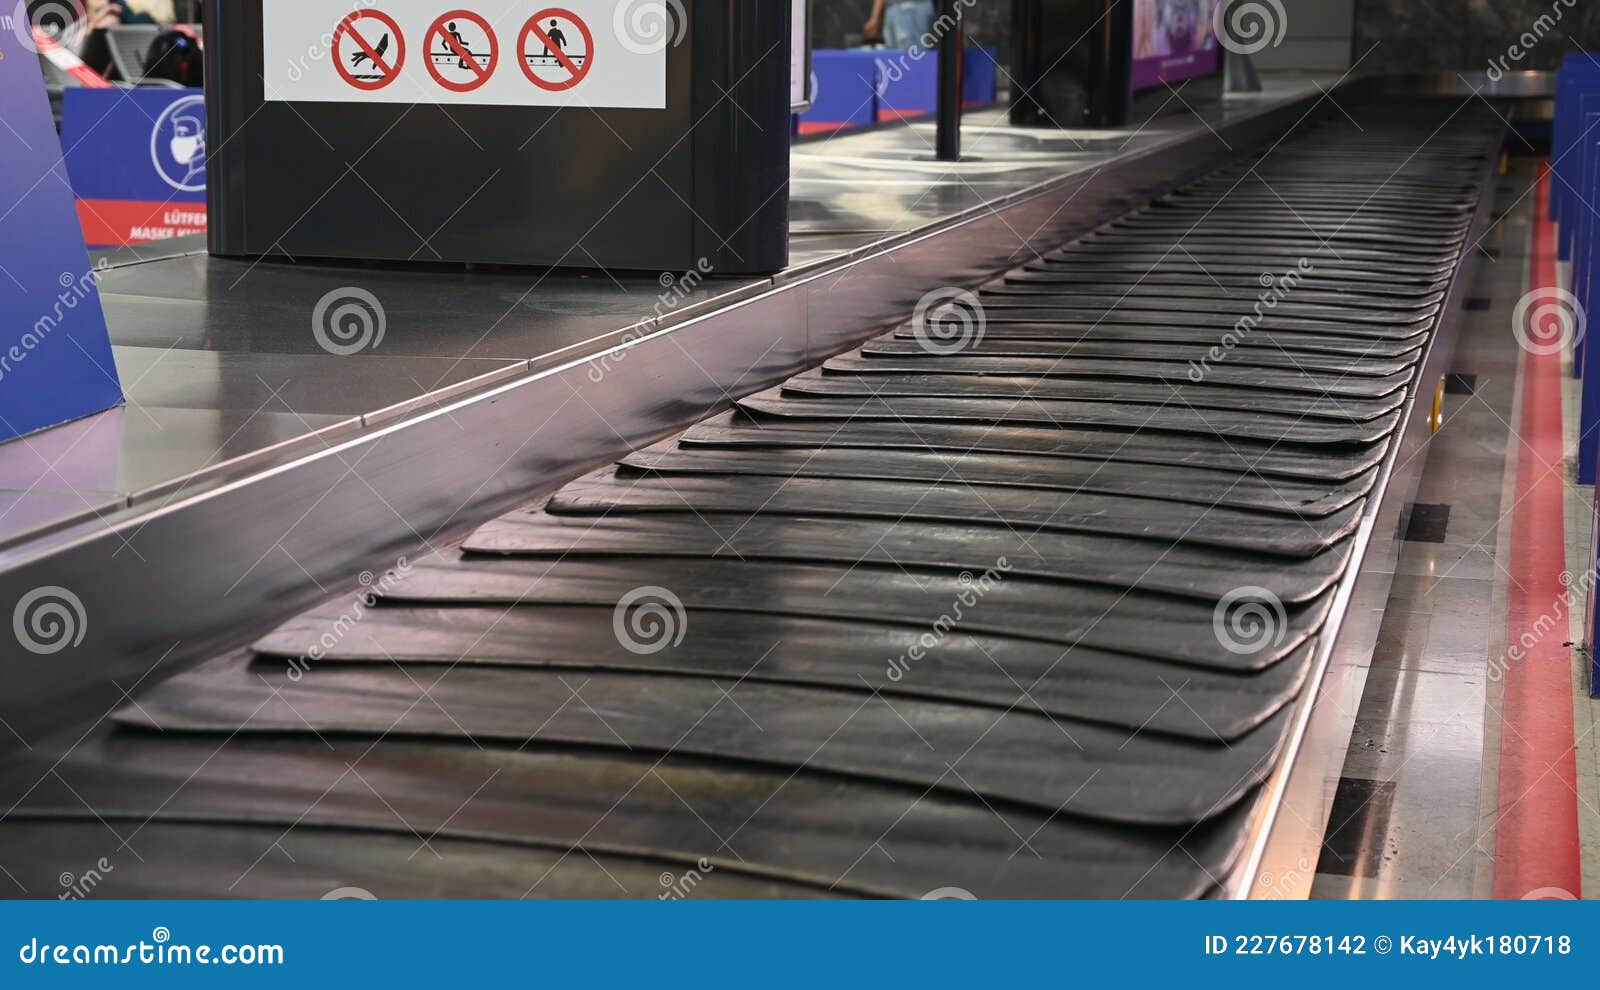 empty suitcase or luggage with conveyor belt at the airport.